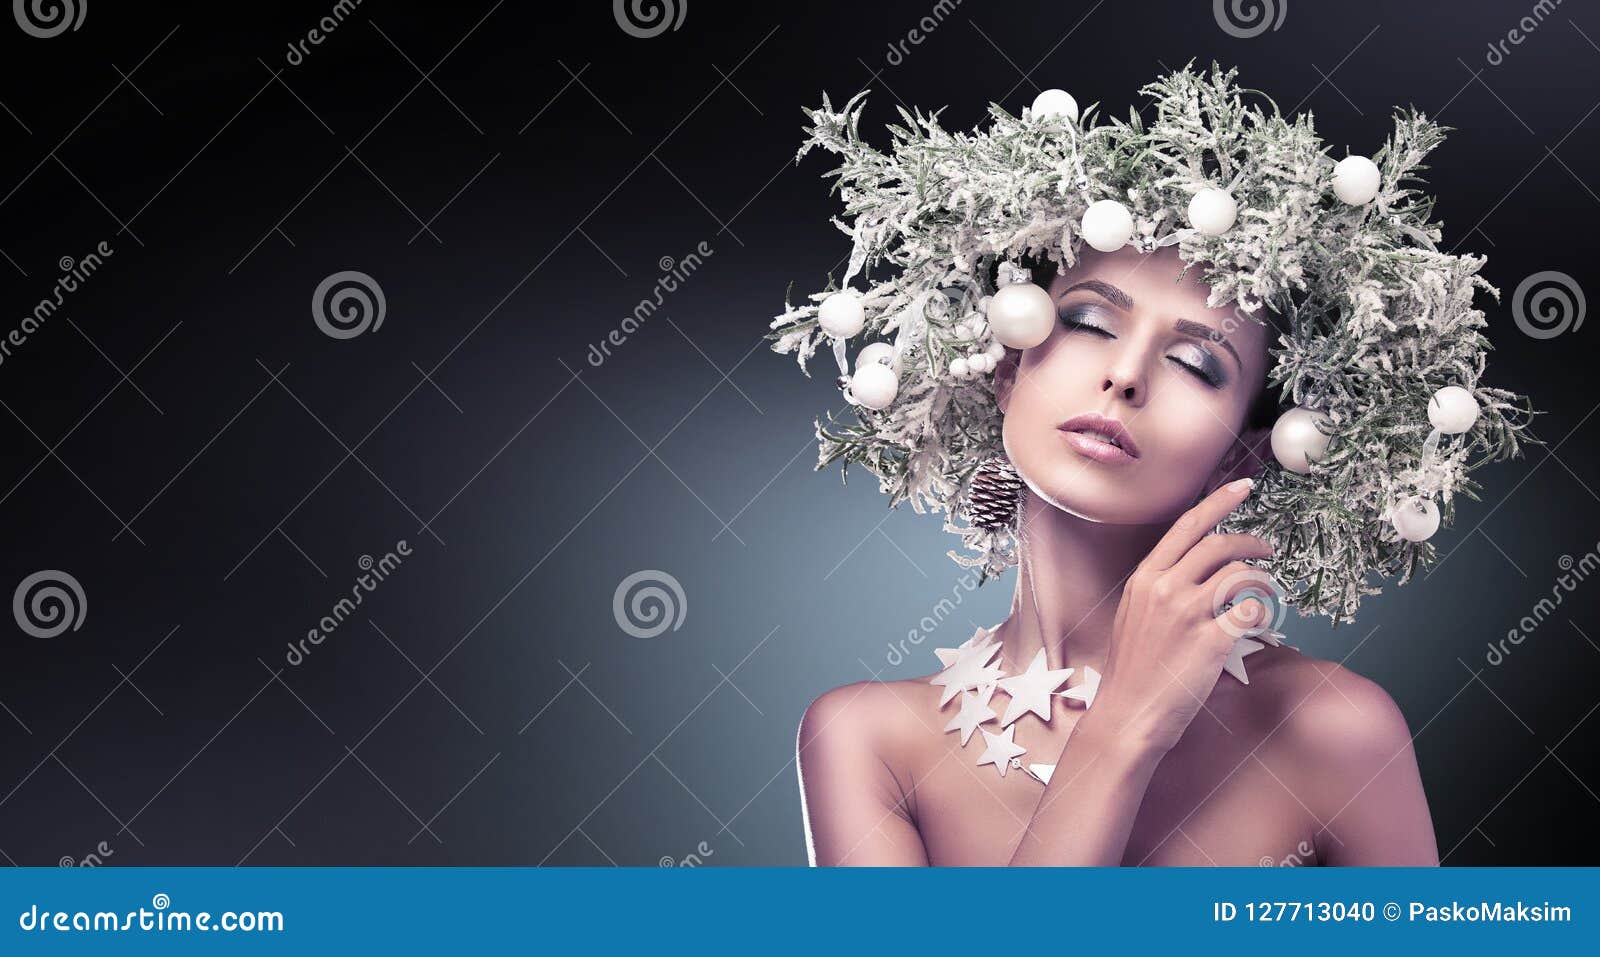 Beauty Fashion Model Girl With Fir Branches Decoration ...